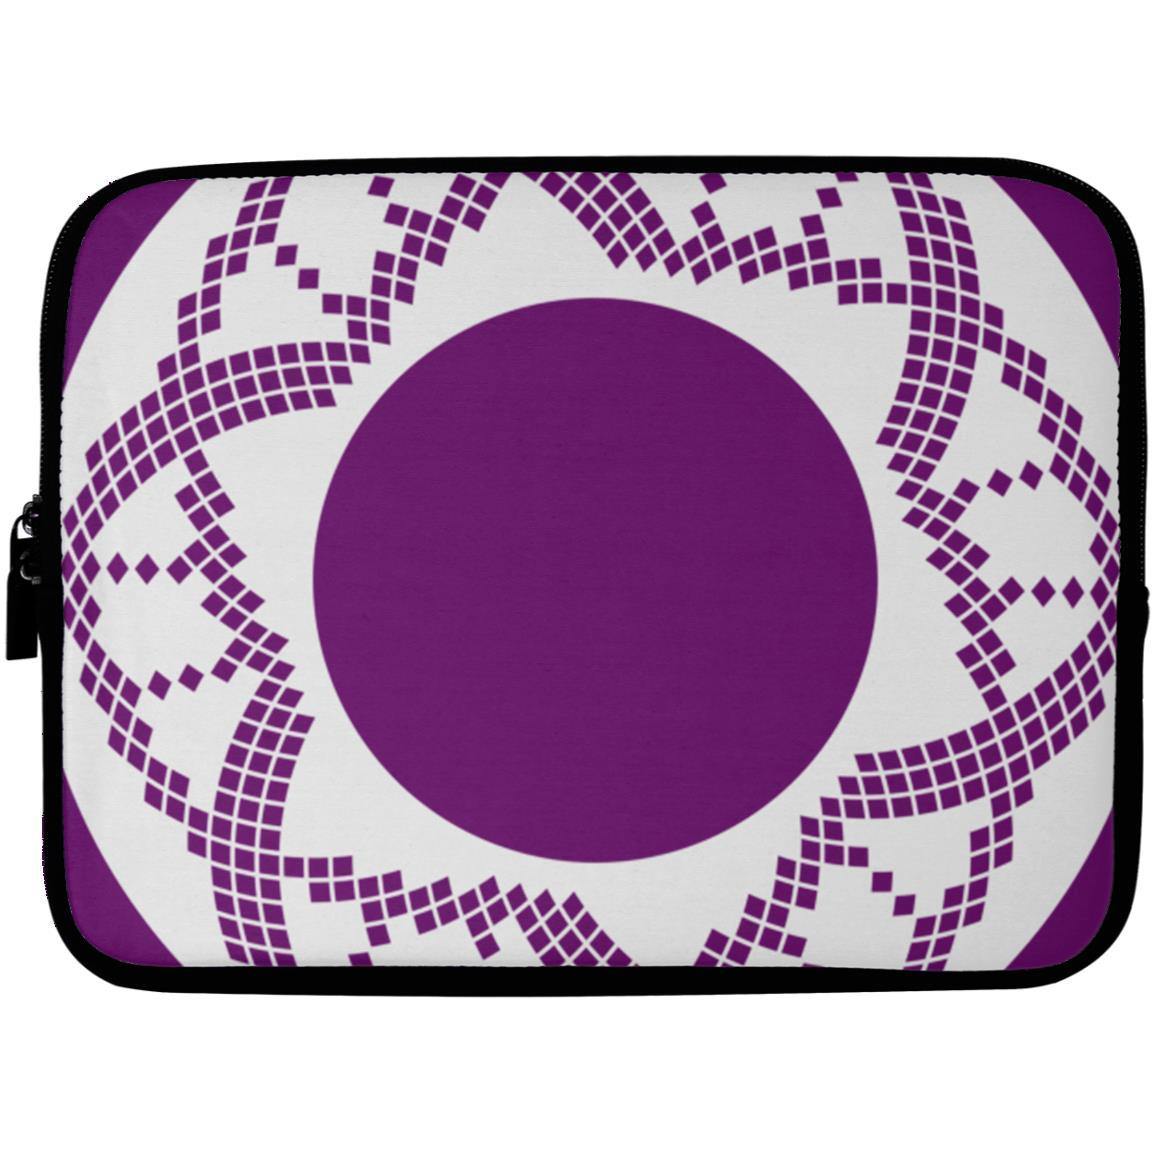 Crop Circle Laptop Sleeve - Crooked Soley - Shapes of Wisdom